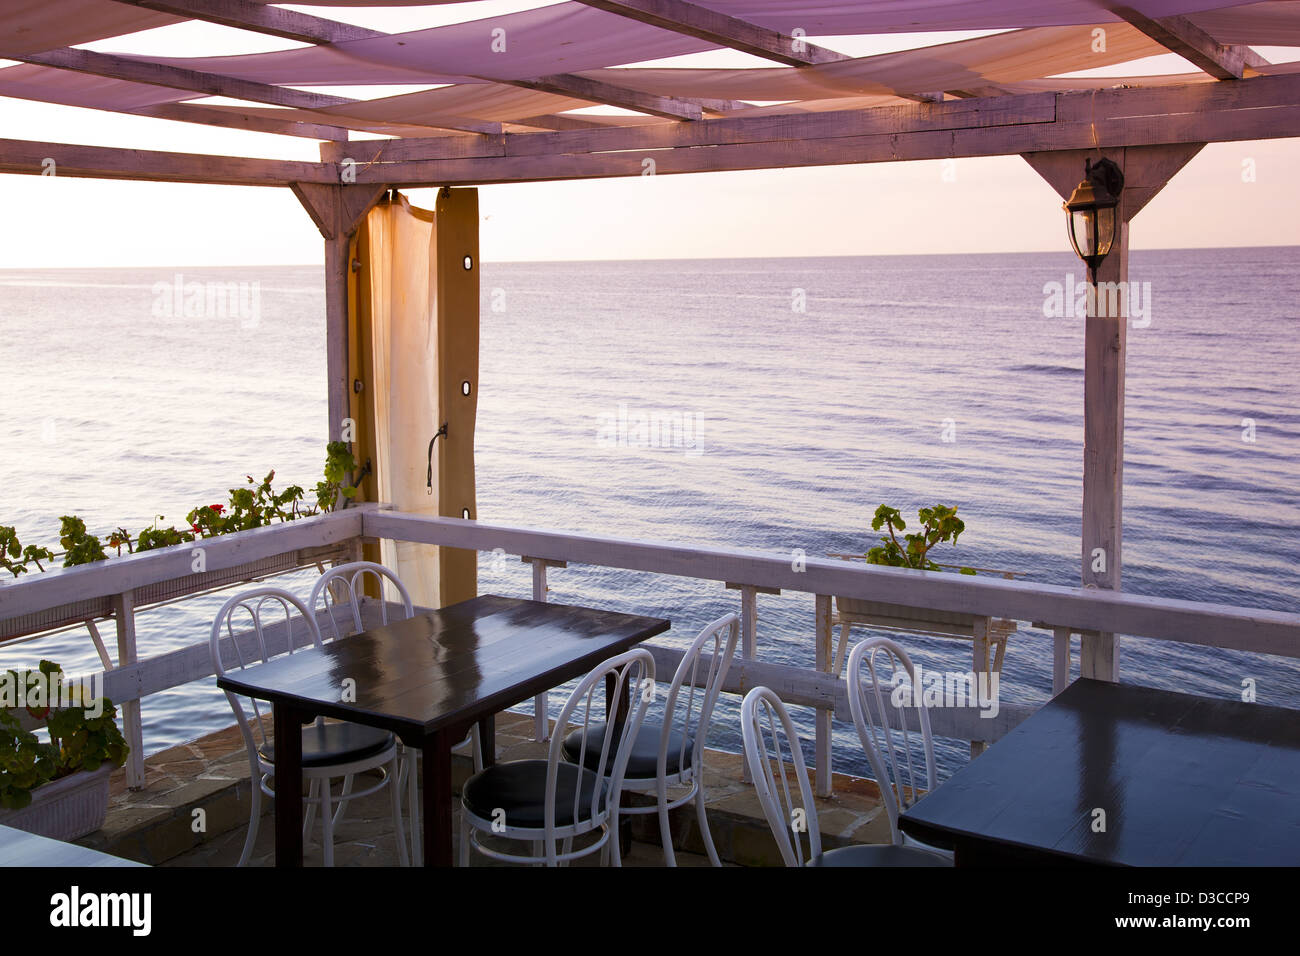 Bulgaria, Europe, Black Sea, Nessebar, Restaurant Dining Tables Overlooking The South Bay Harbor At Sunrise. Stock Photo